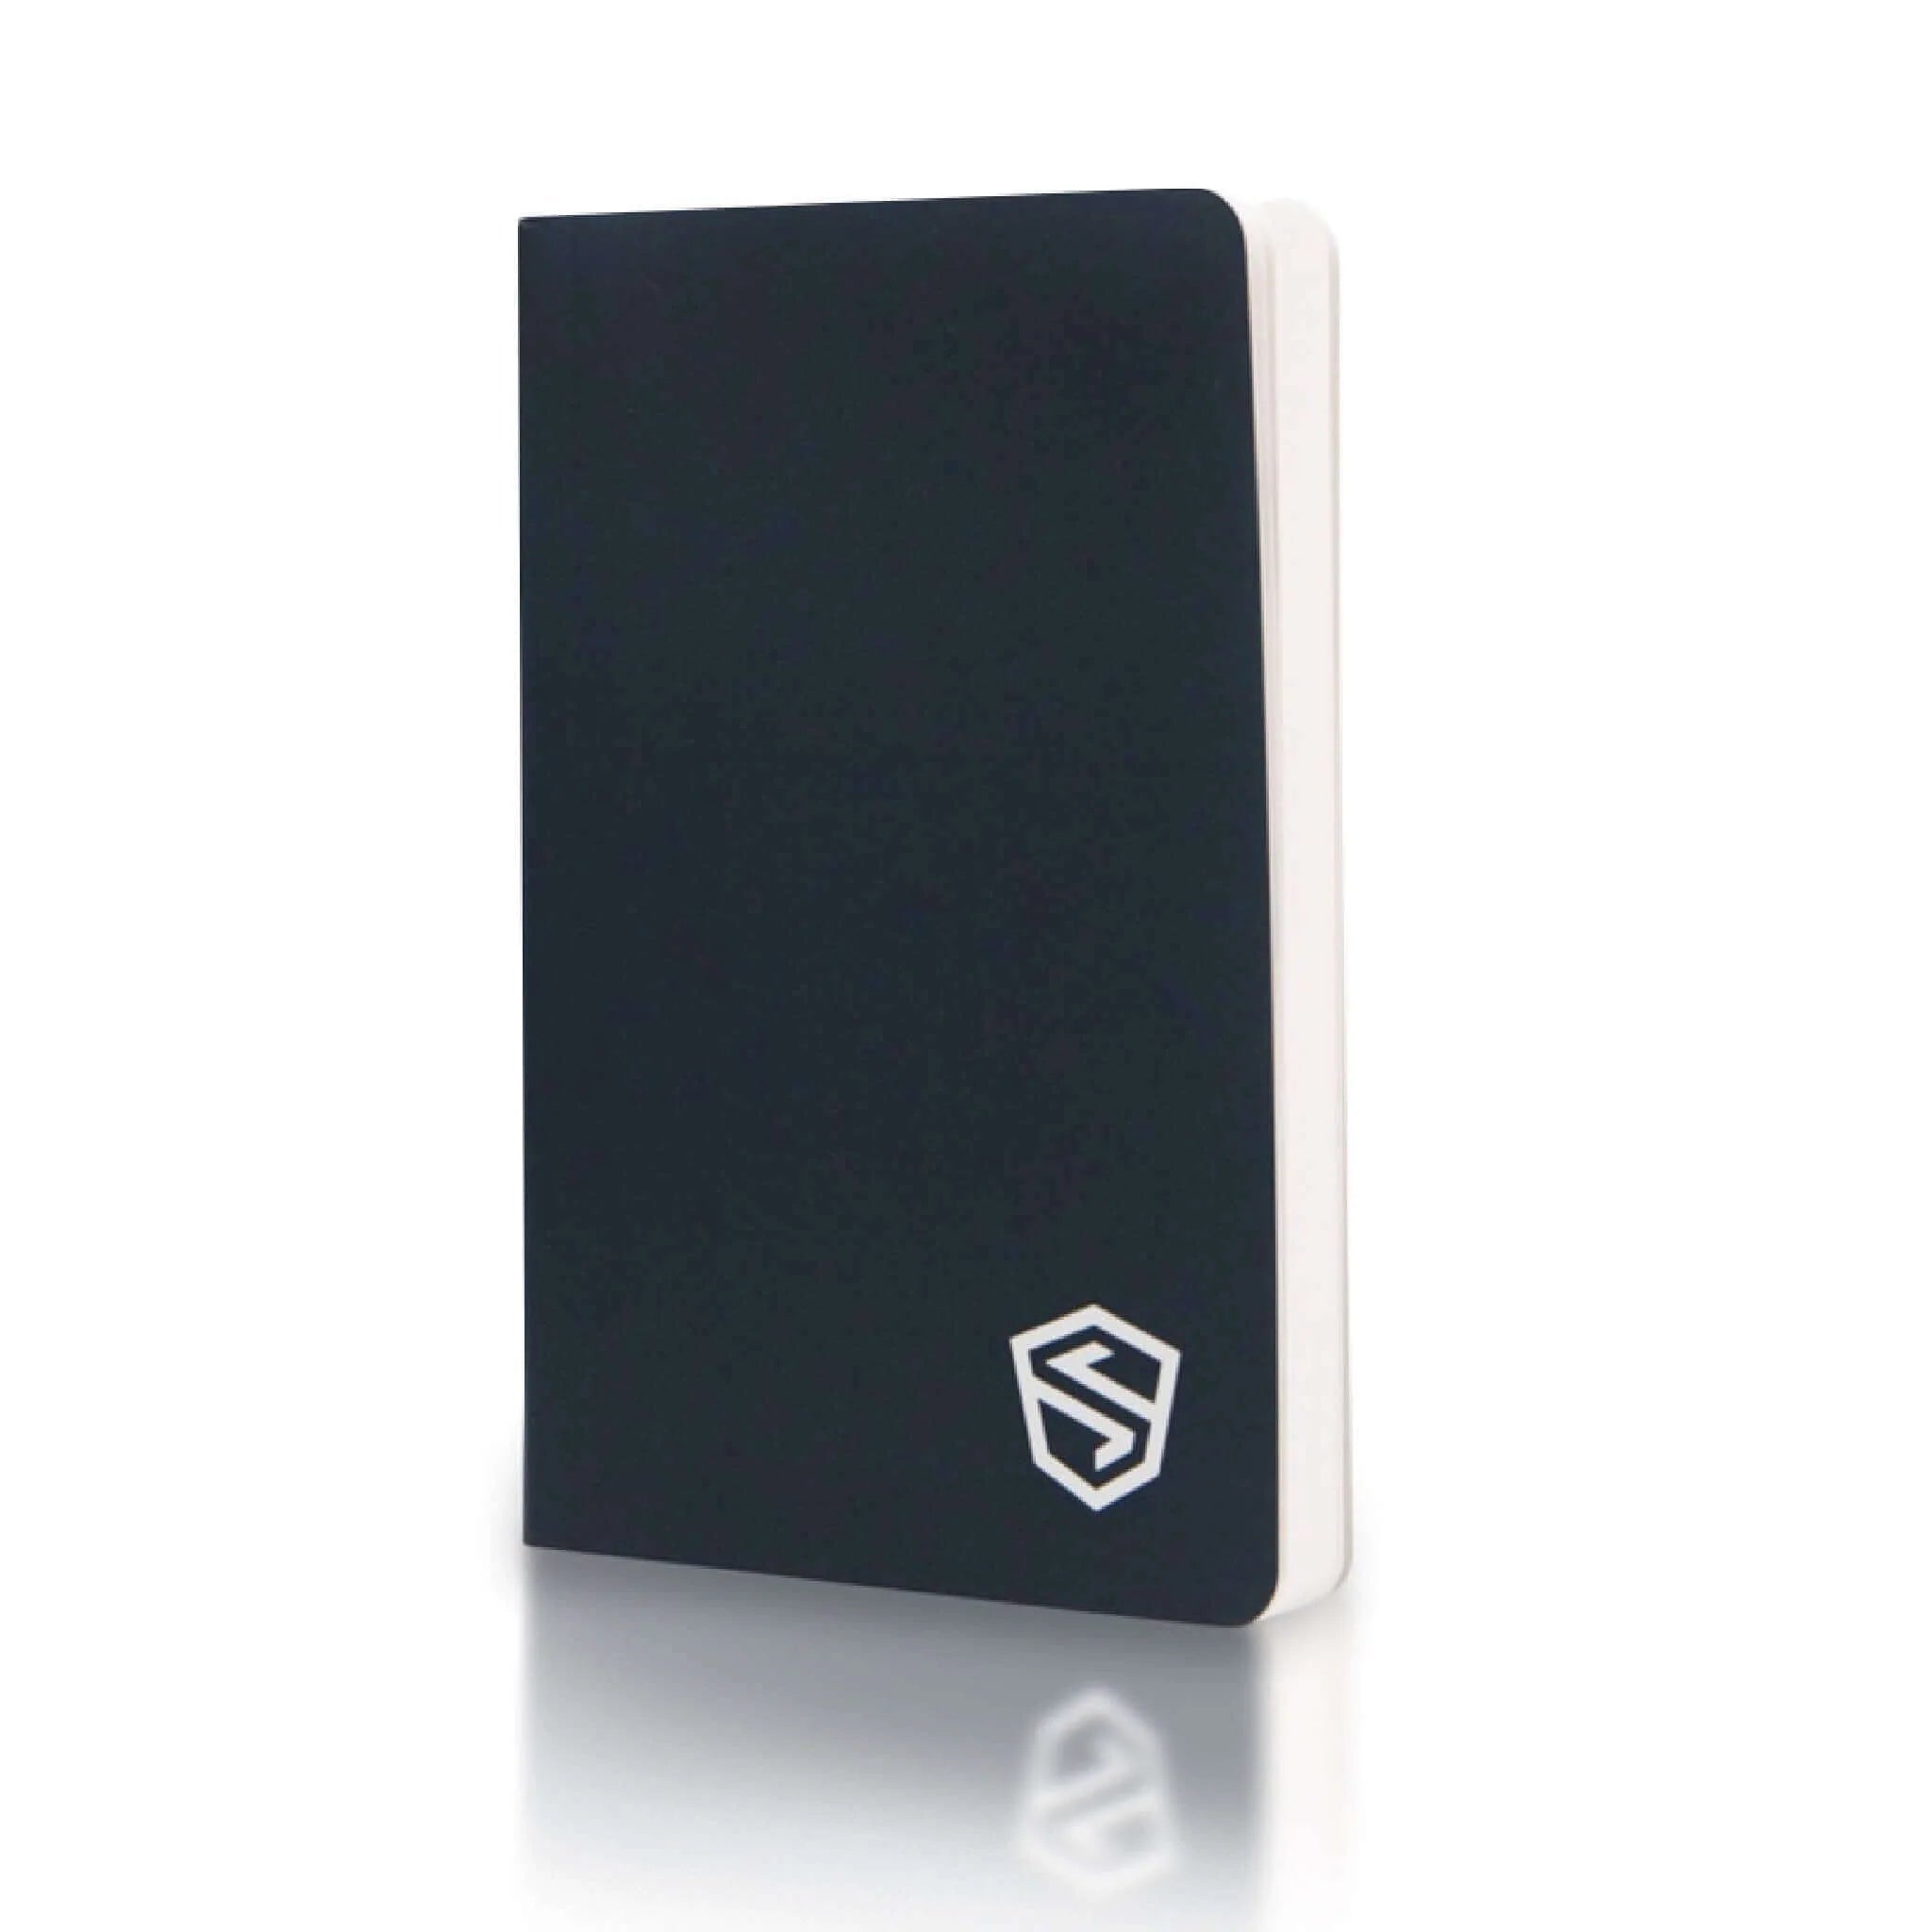  Storium Crypto Seed Phrase Storage Notebook - Waterproof Stone  Paper Book - Keep Your Cryptocurrency Recovery Phrase Password Safe &  Secure - Cold Storage Wallet Backup Journal - Pocket Size 2-Pack : Office  Products